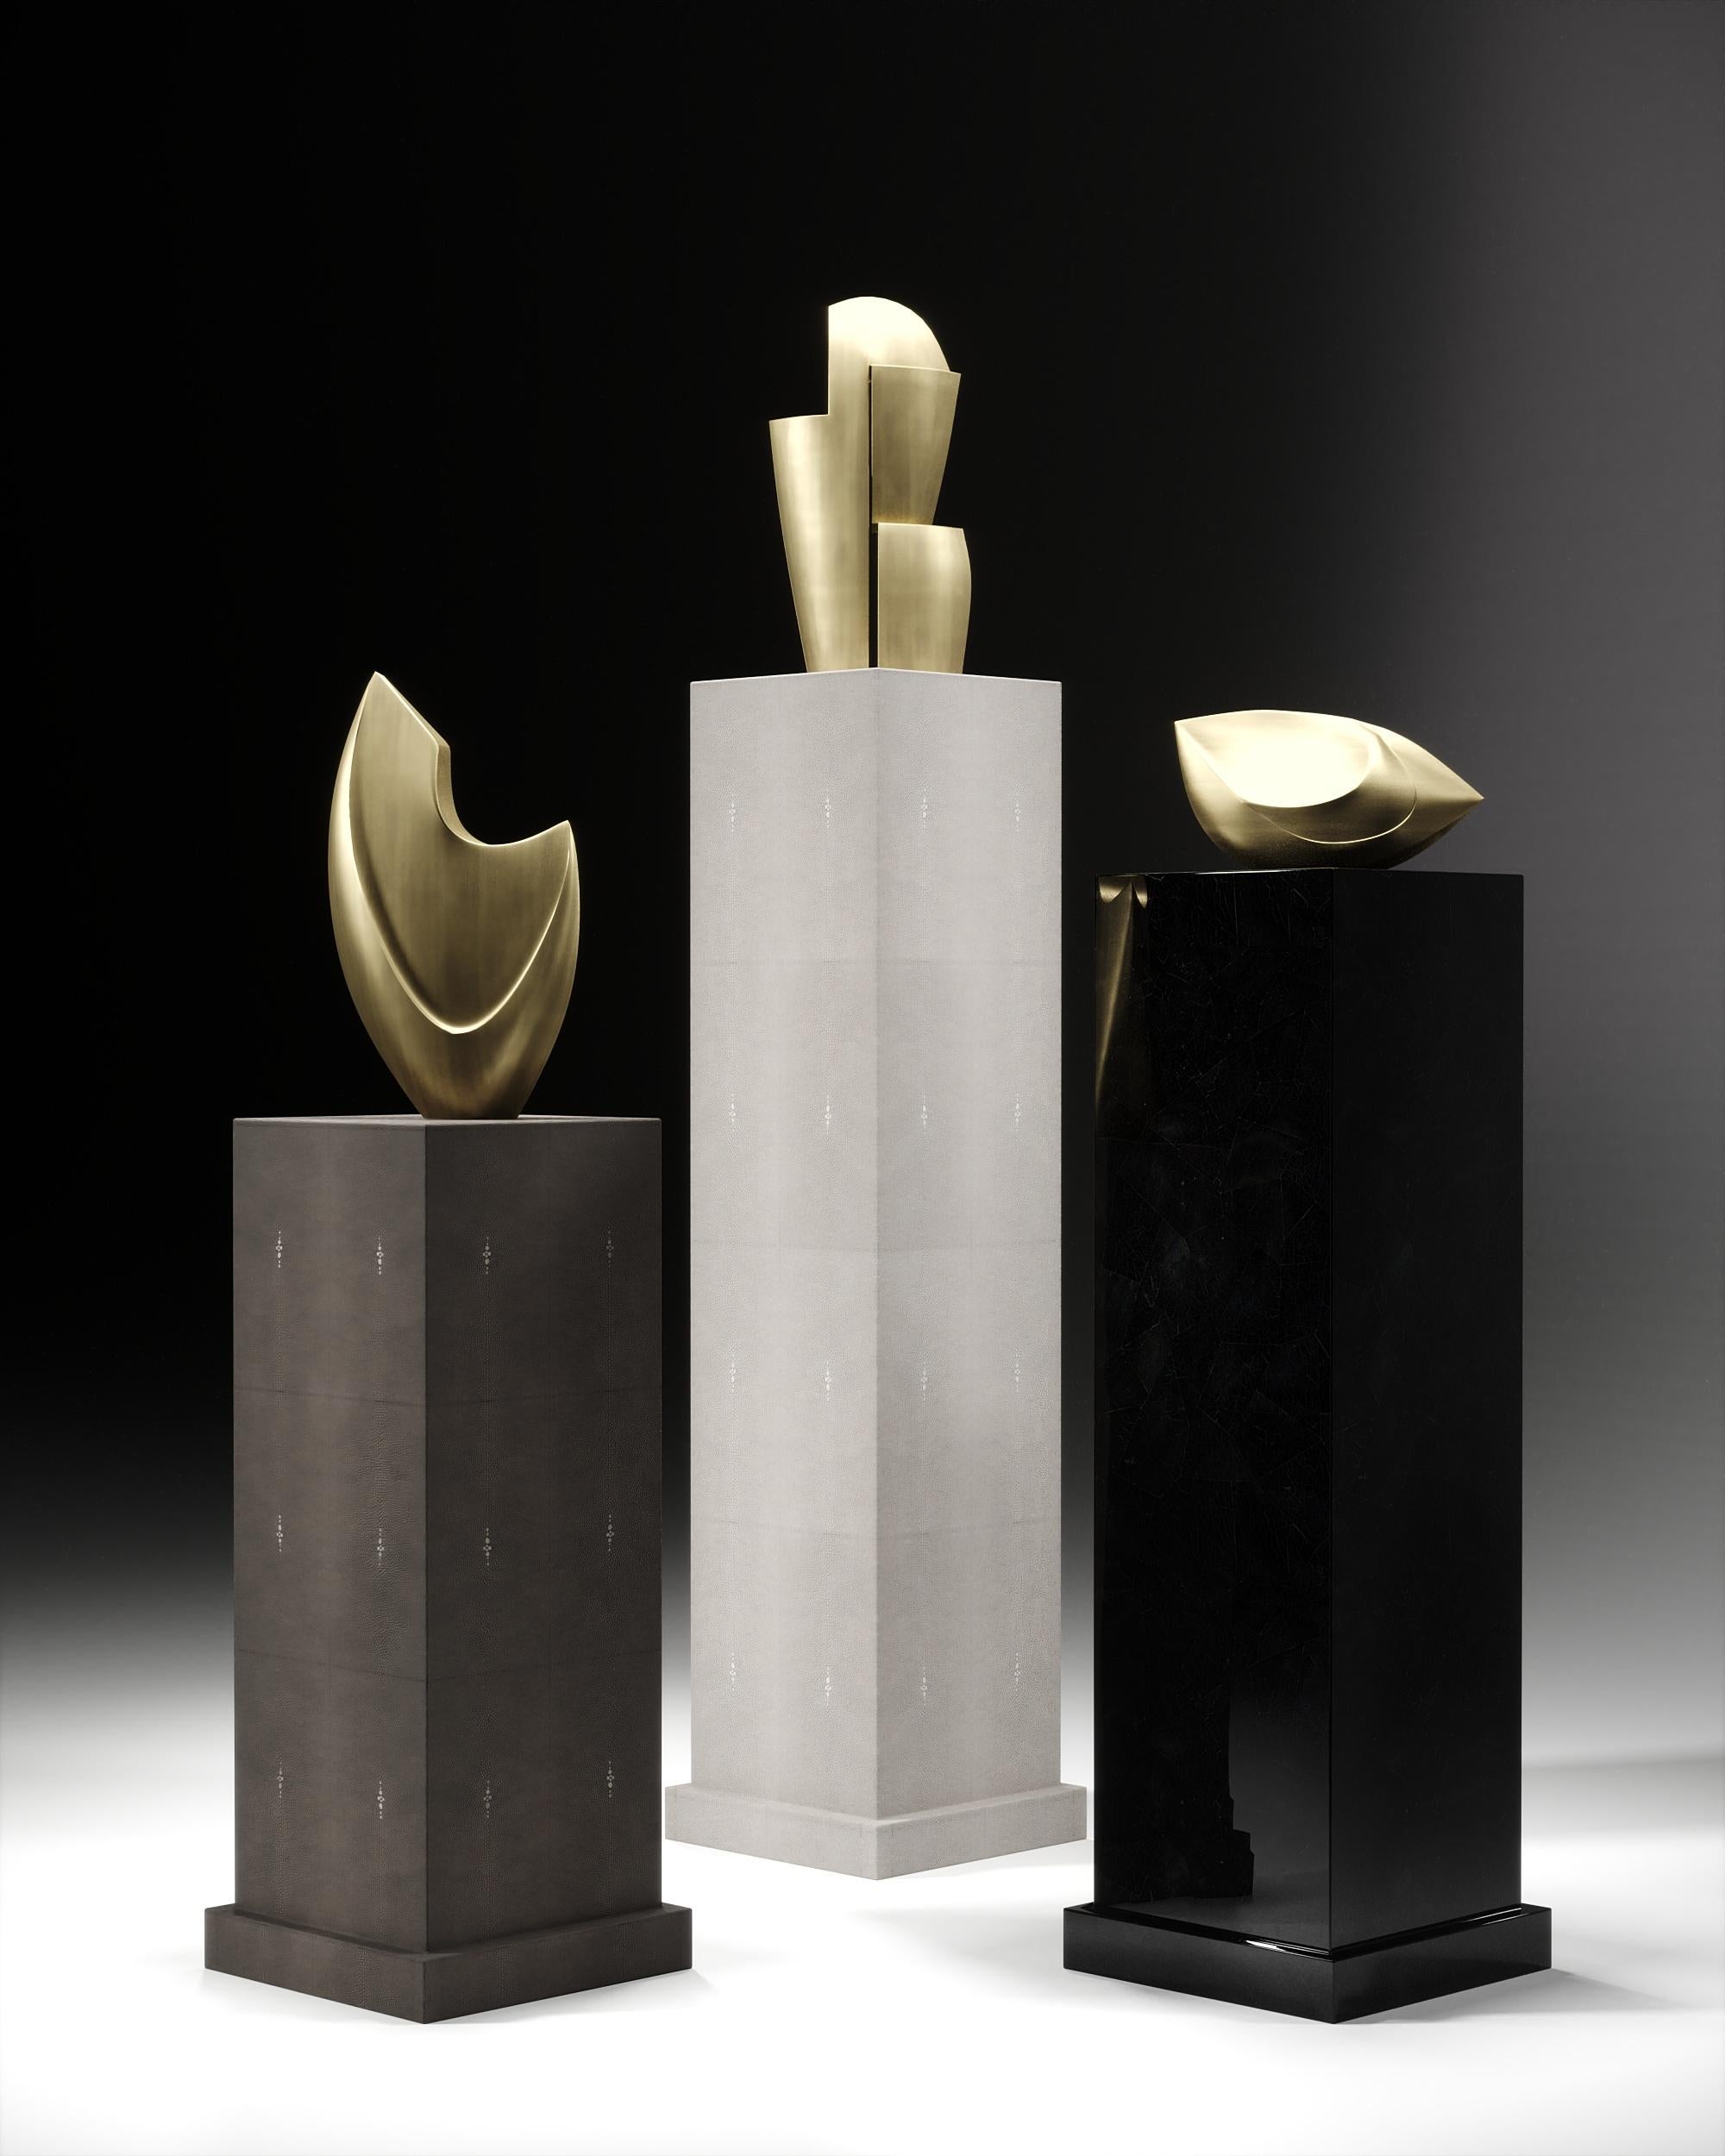 This set of 3 columns inlaid in cream shagreen, coal black shagreen and black pen shell by R&Y Augousti and 3 bronze-patina brass abstract sculptures by Patrick Coard Paris, is the ultimate luxury accent pieces for any space. Options to purchase